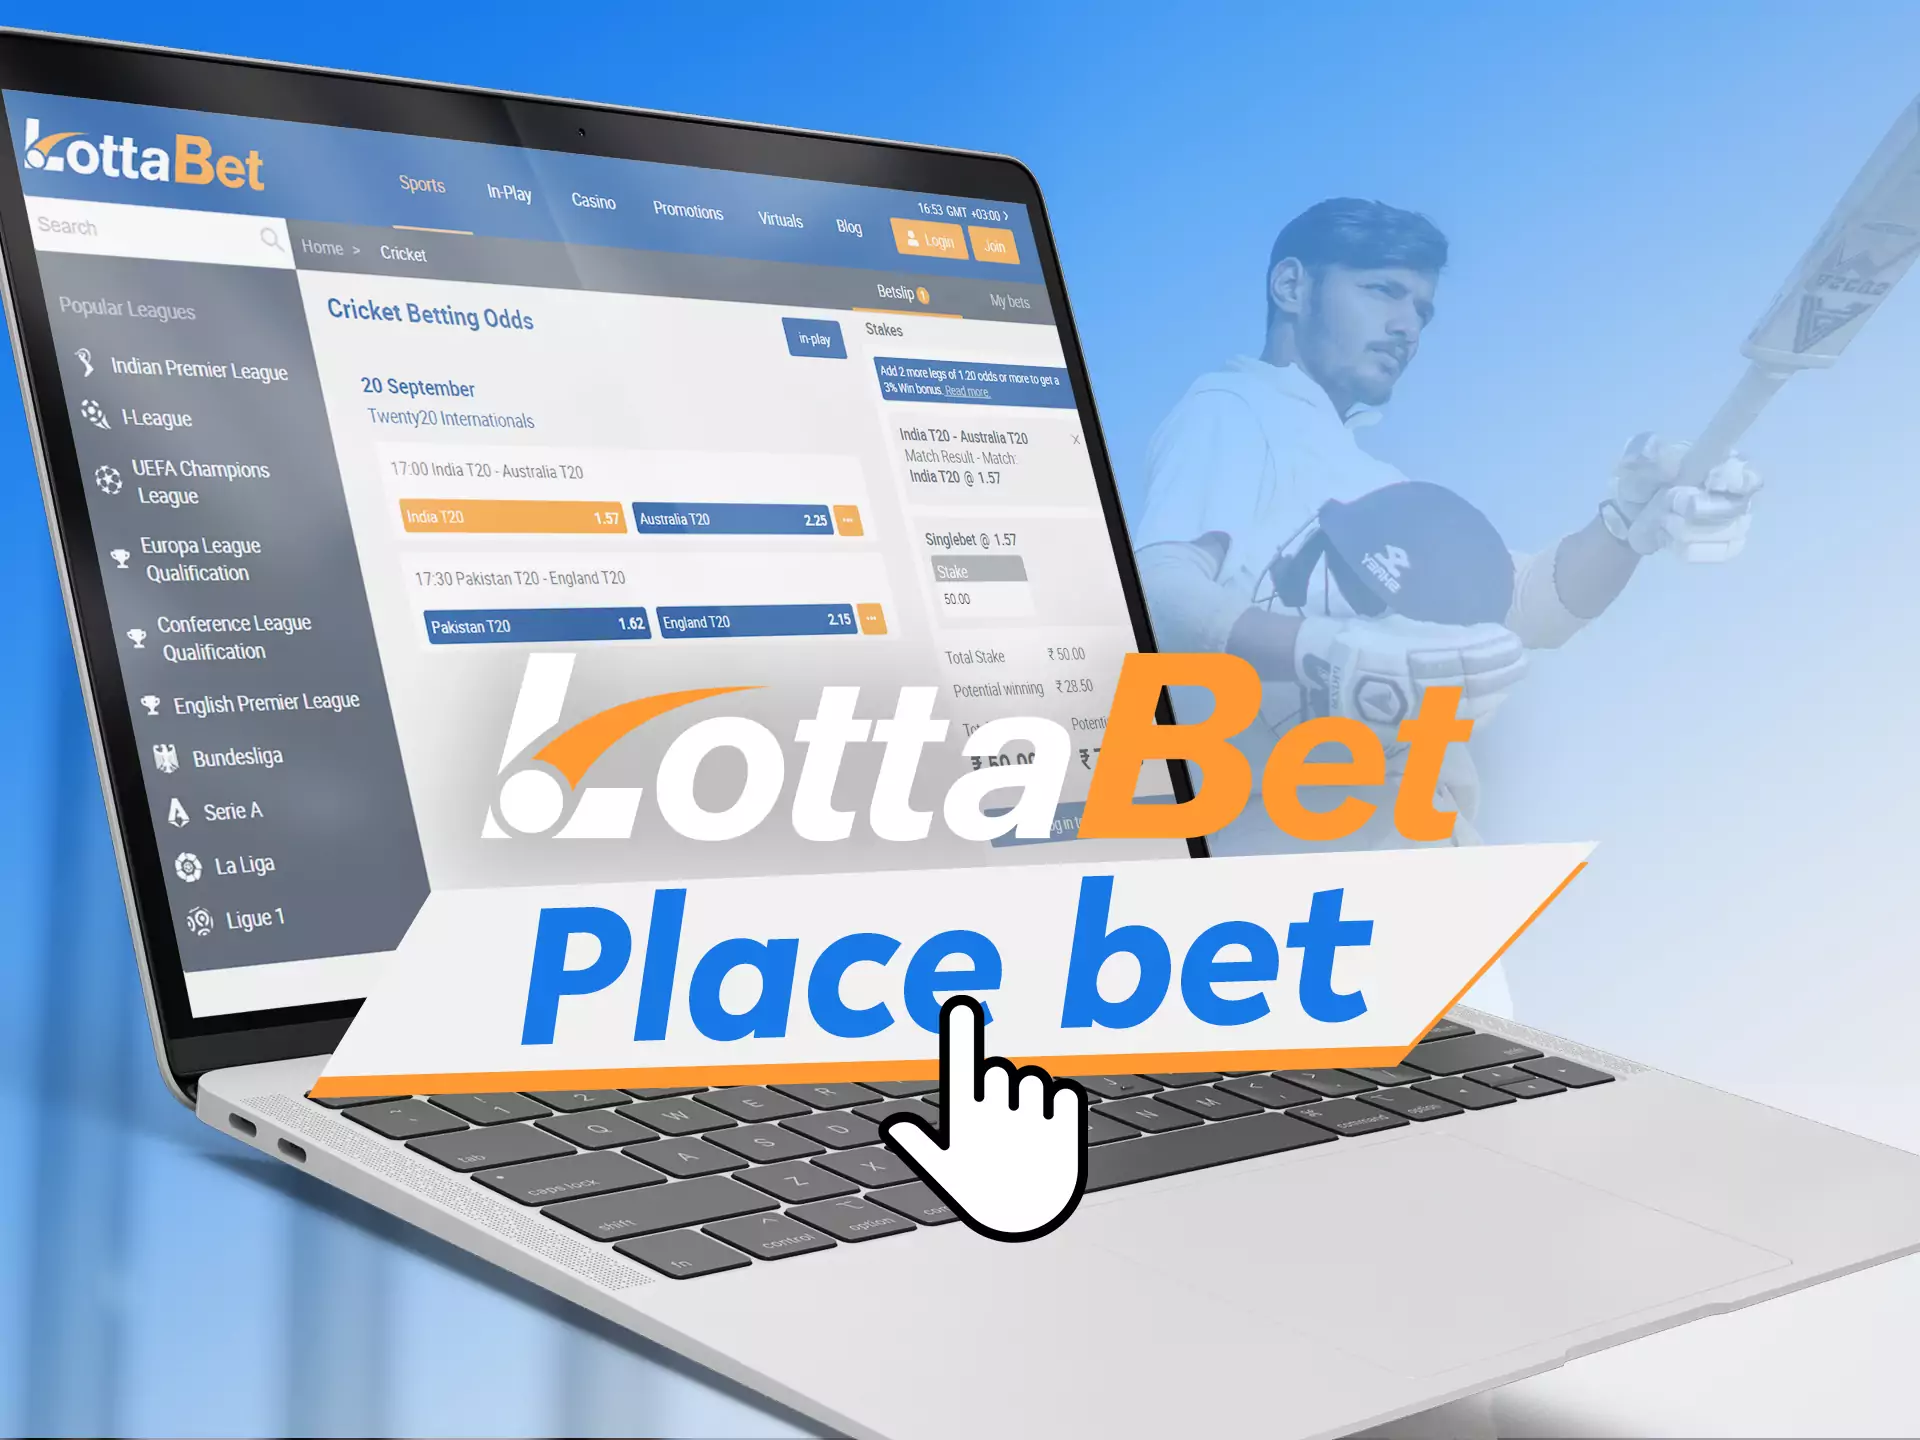 After you choose a match on Lottabet, make a prediction and place a bet.